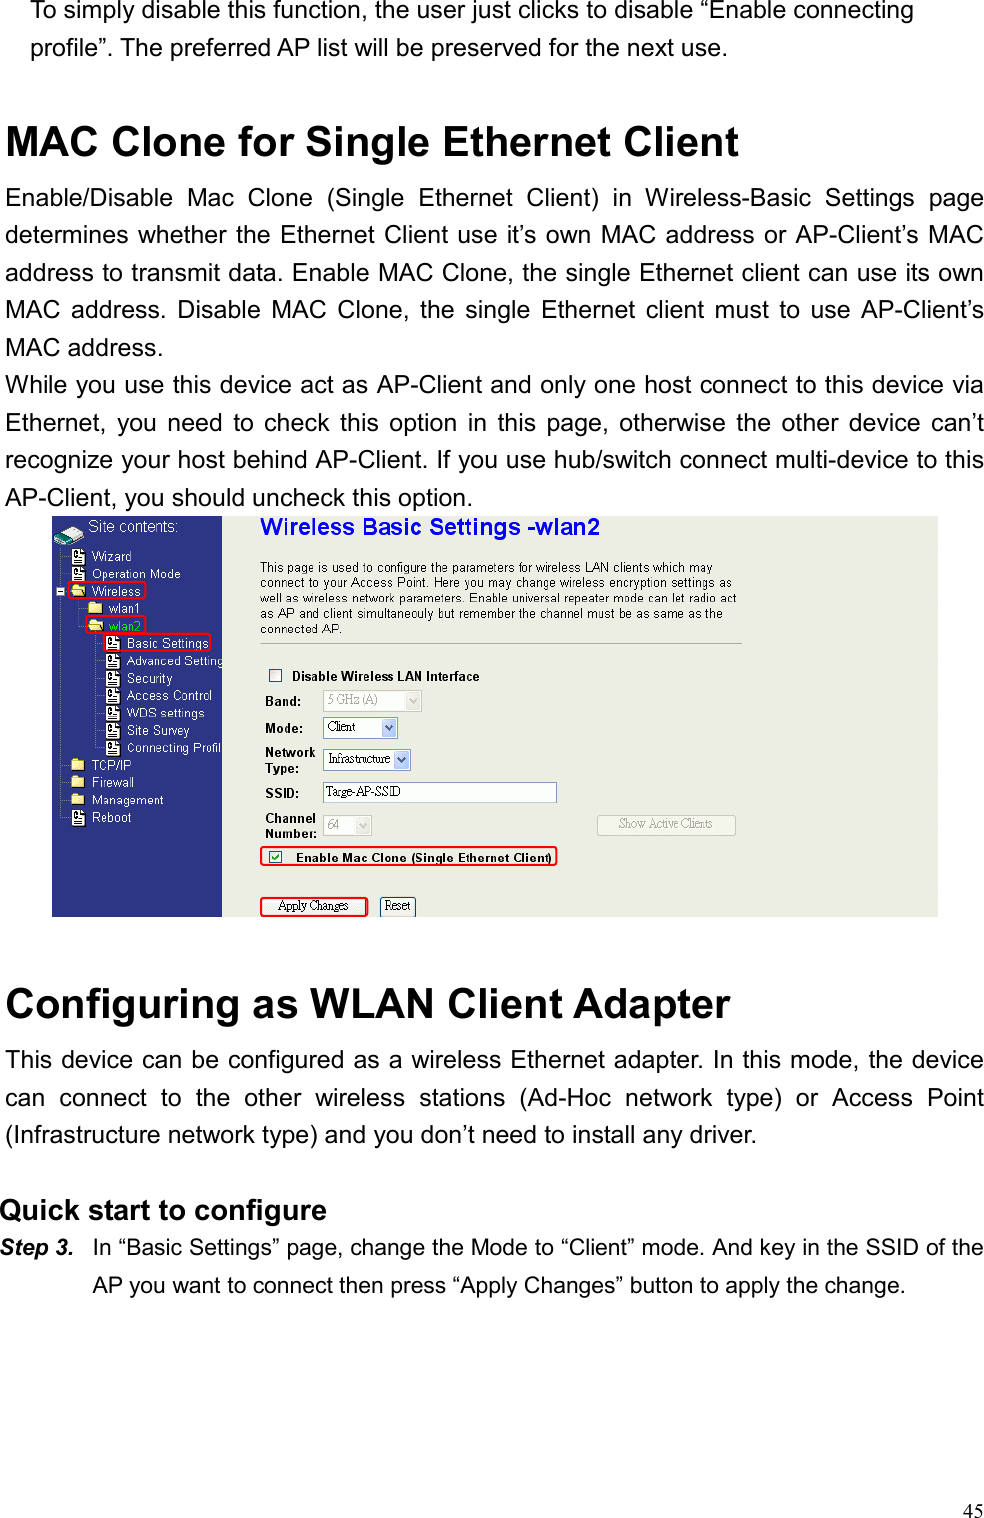  45    To simply disable this function, the user just clicks to disable “Enable connecting profile”. The preferred AP list will be preserved for the next use.  MAC Clone for Single Ethernet Client Enable/Disable Mac Clone (Single Ethernet Client) in Wireless-Basic Settings page determines whether the Ethernet Client use it’s own MAC address or AP-Client’s MAC address to transmit data. Enable MAC Clone, the single Ethernet client can use its own MAC address. Disable MAC Clone, the single Ethernet client must to use AP-Client’s MAC address.   While you use this device act as AP-Client and only one host connect to this device via Ethernet, you need to check this option in this page, otherwise the other device can’t recognize your host behind AP-Client. If you use hub/switch connect multi-device to this AP-Client, you should uncheck this option.   Configuring as WLAN Client Adapter This device can be configured as a wireless Ethernet adapter. In this mode, the device can connect to the other wireless stations (Ad-Hoc network type) or Access Point (Infrastructure network type) and you don’t need to install any driver.   Quick start to configure Step 3.  In “Basic Settings” page, change the Mode to “Client” mode. And key in the SSID of the AP you want to connect then press “Apply Changes” button to apply the change.   